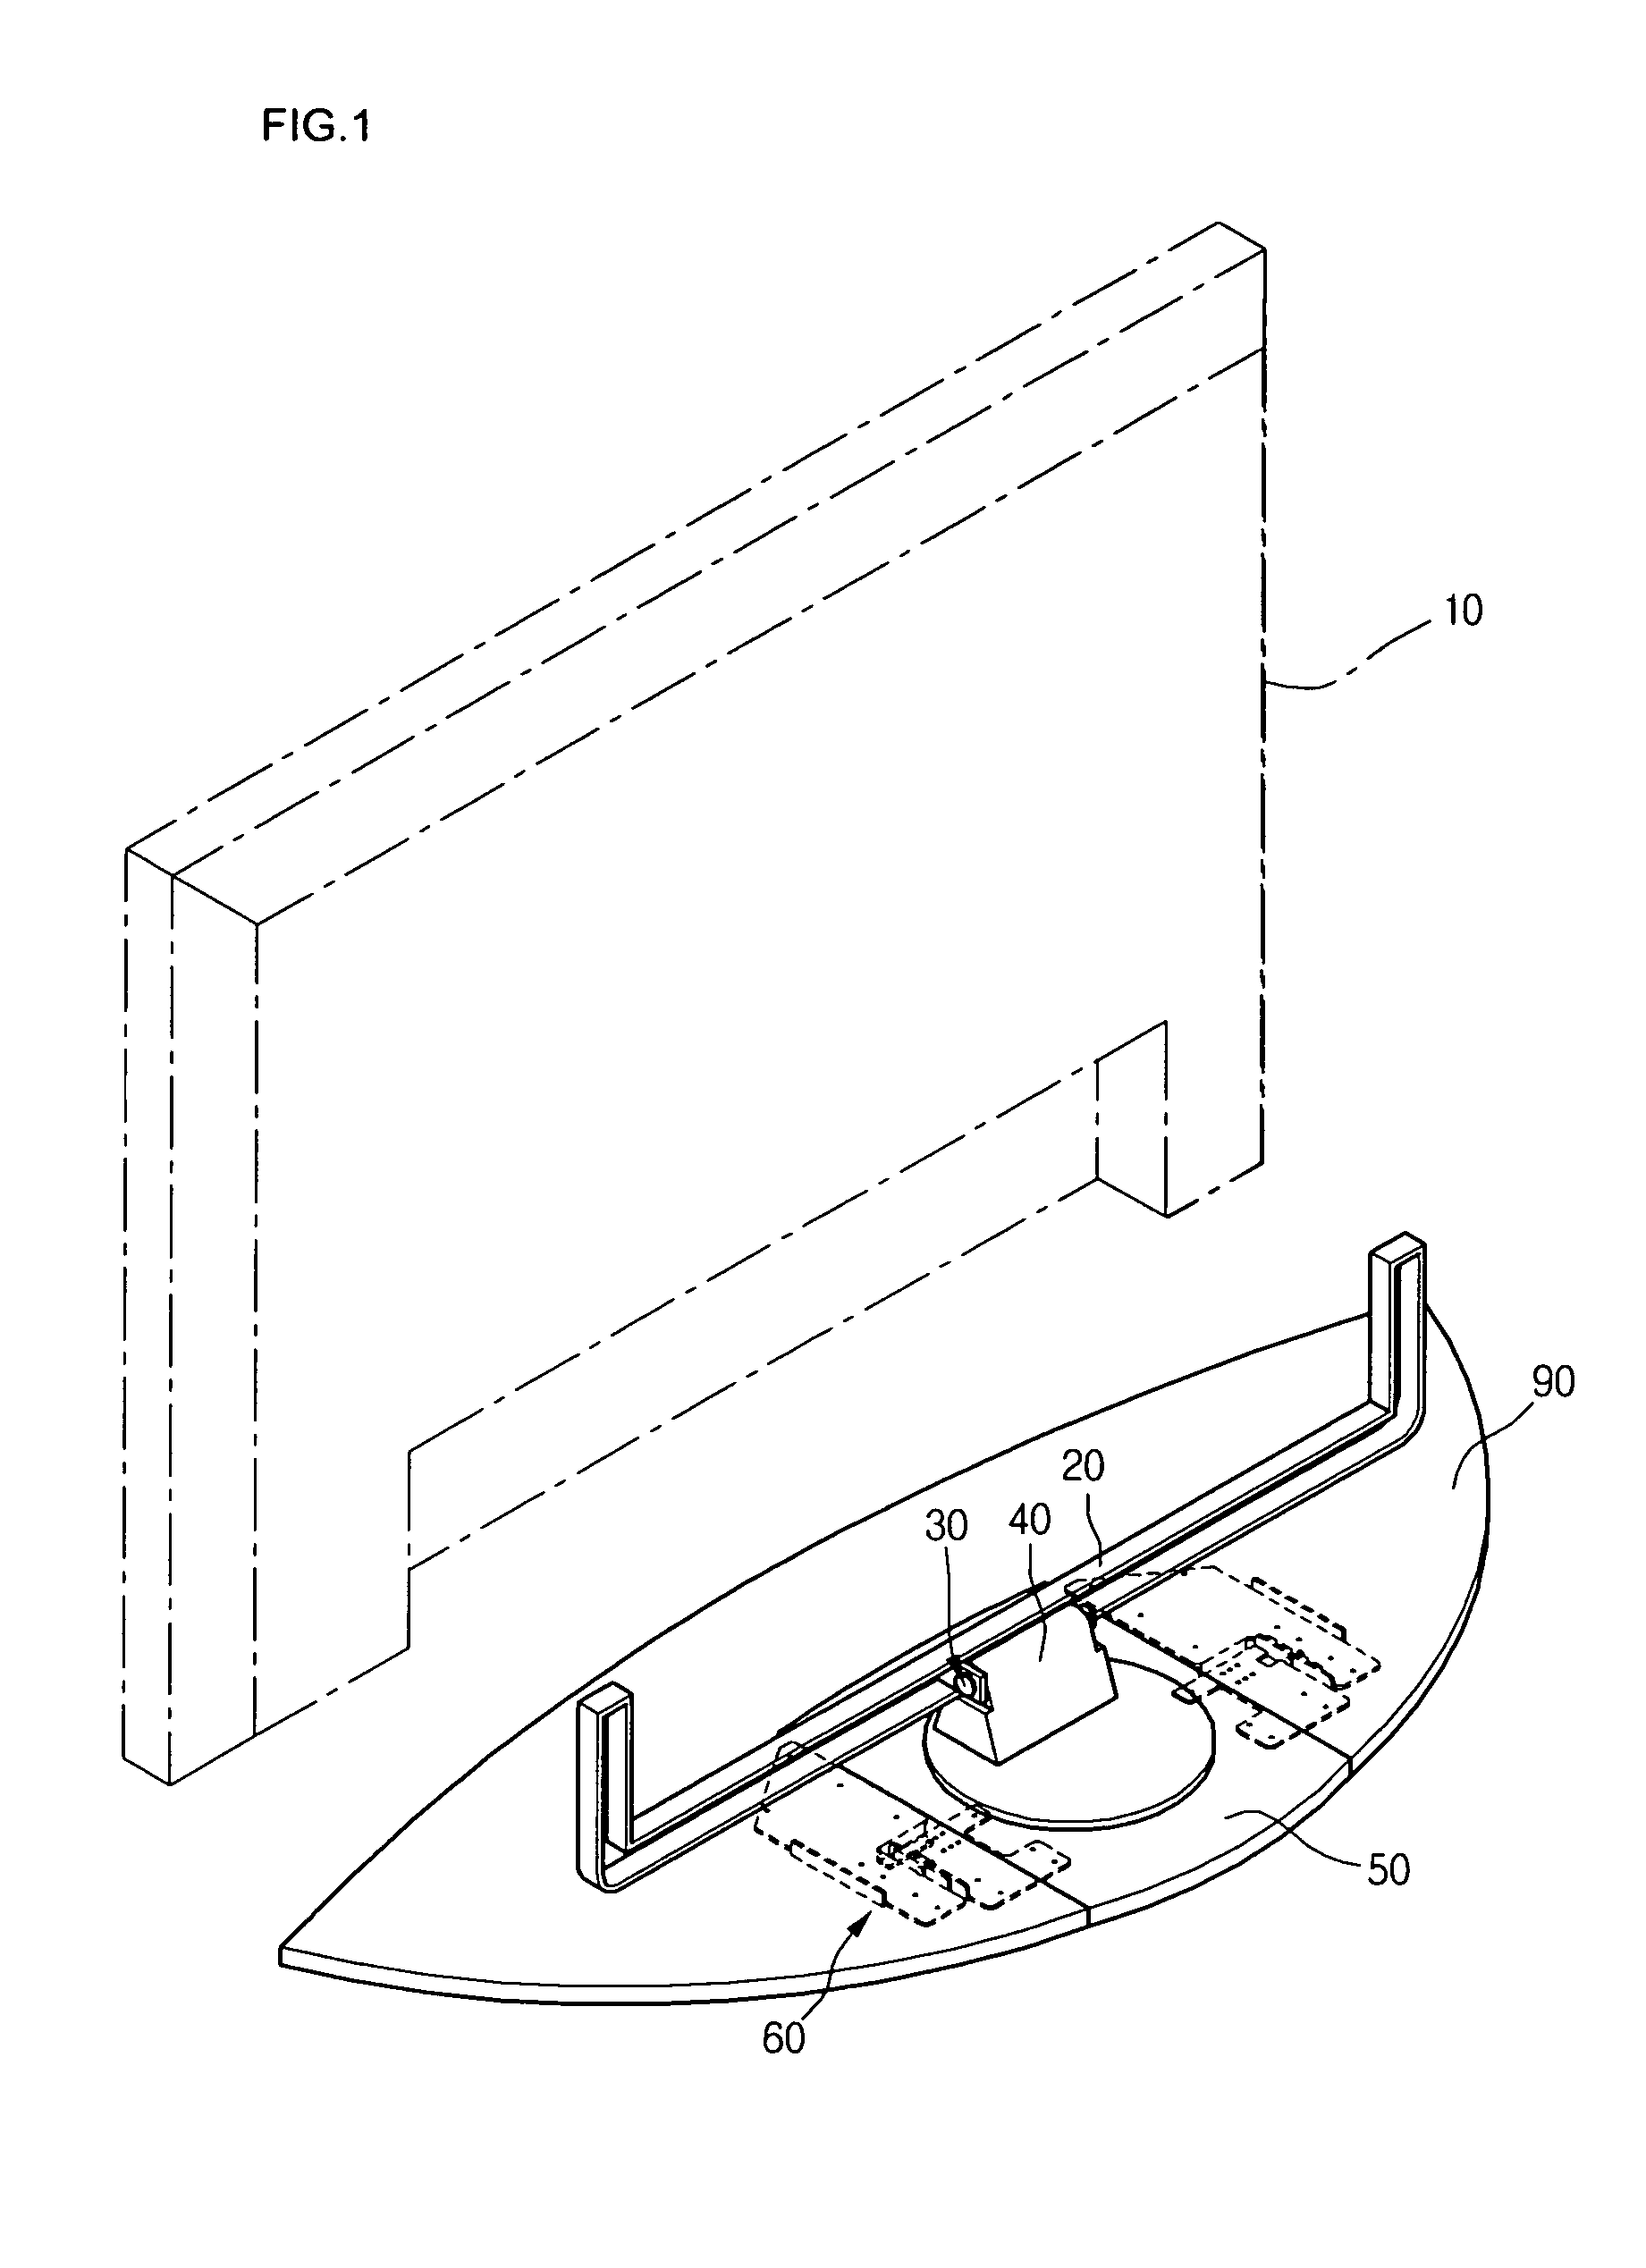 Foldable stand for display device